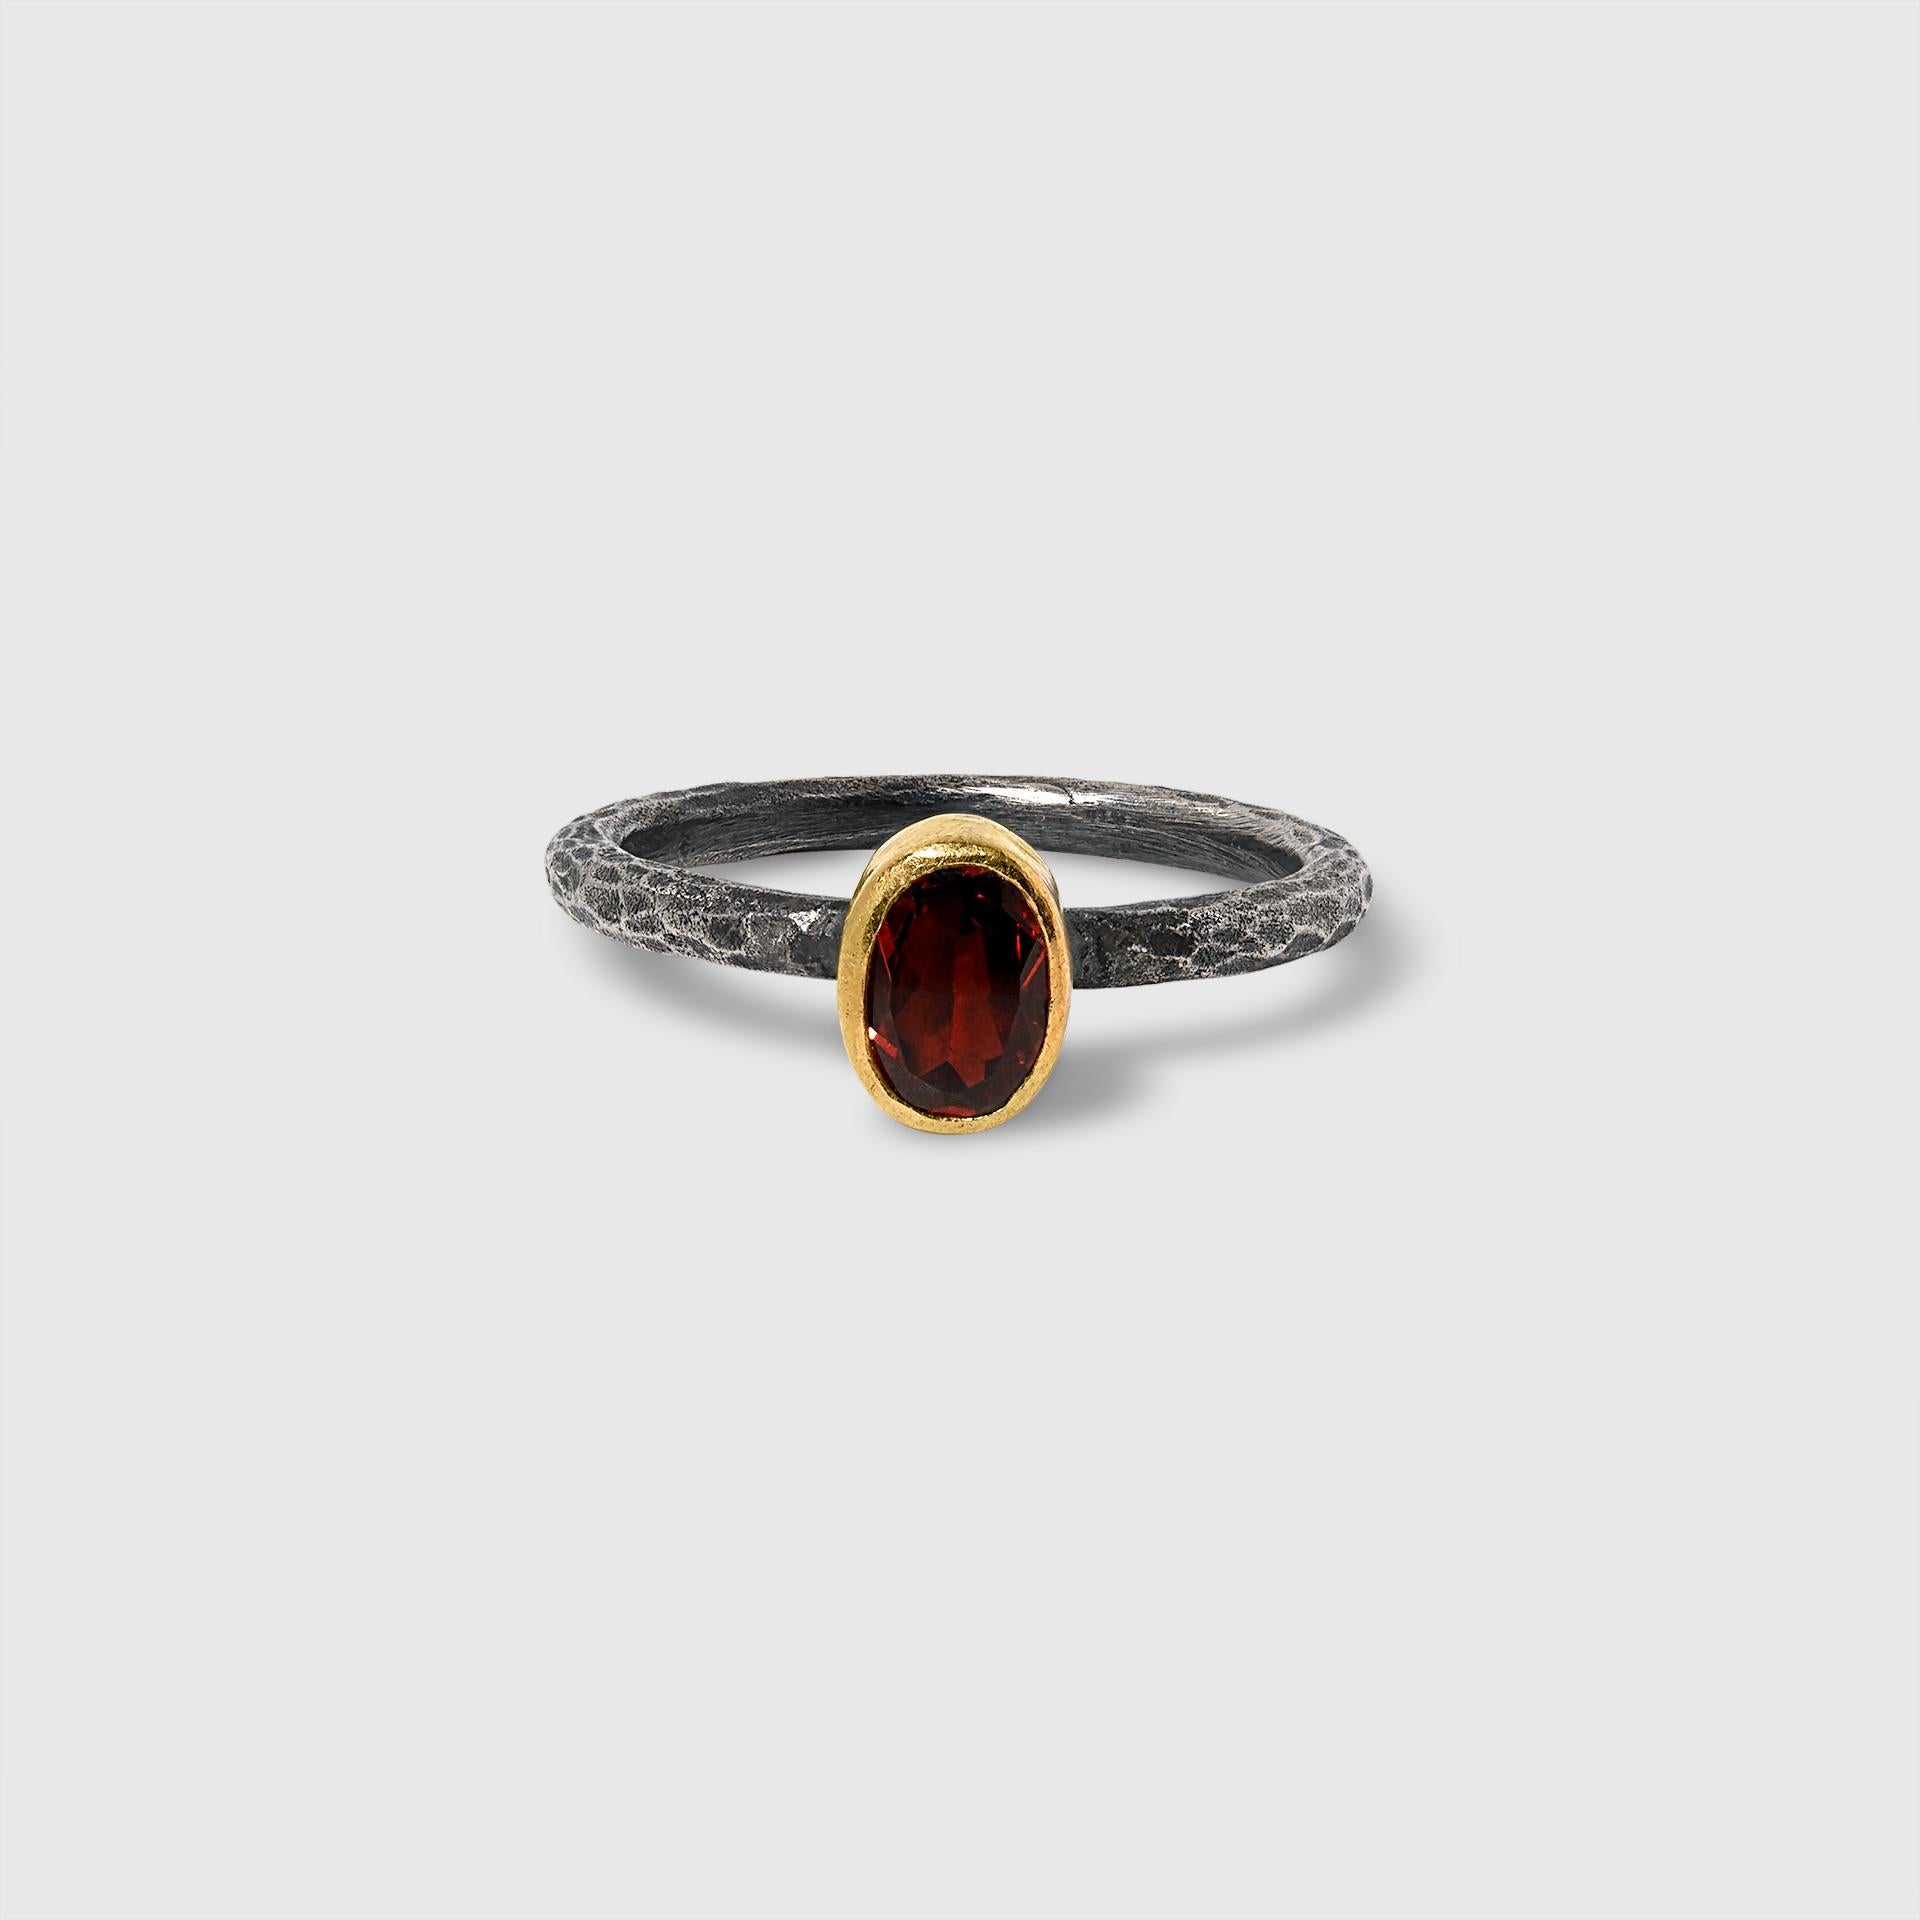 Dark Red, Oval, Garnet Solitaire Ring, 24kt Gold and Silver In New Condition For Sale In Bozeman, MT